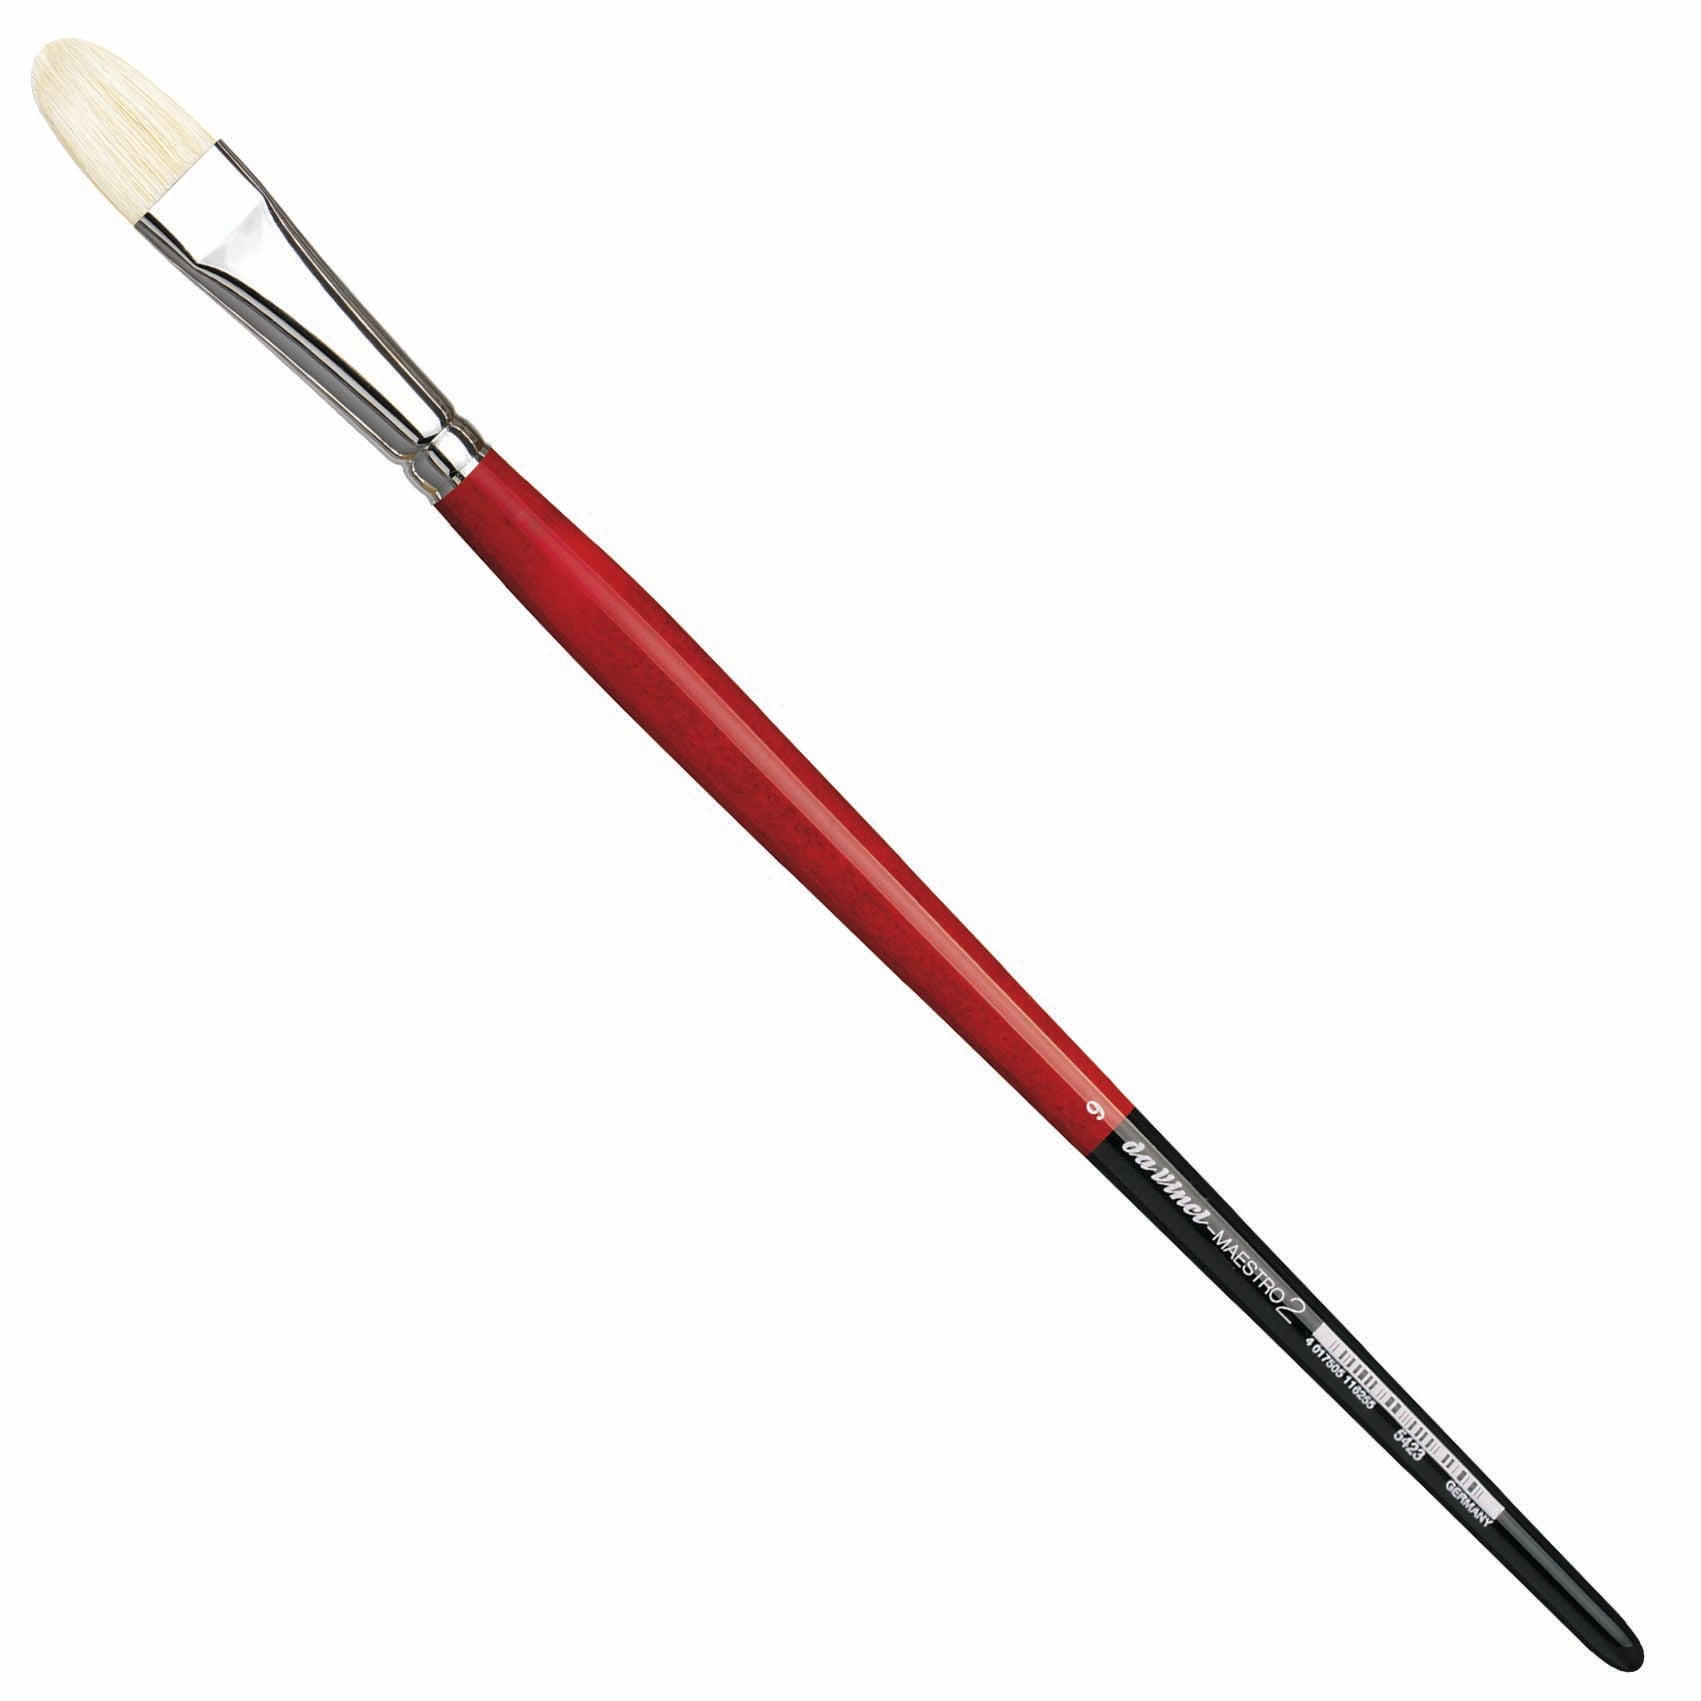 The Da Vinci Maestro 2 Bristle Brush is crafted by interlocking natural hog bristles deep into the ferrule, ensuring long-lasting elasticity, springiness, and durability. This design also allows the brush to hold colour exceptionally well. It features long red handles with black ends and silver ferrules, making it ideal for oil and acrylic painting. Additionally, its Filbert and Fresco shape makes it suitable for painting on wet, plastered surfaces and for mural painting on dry stucco.